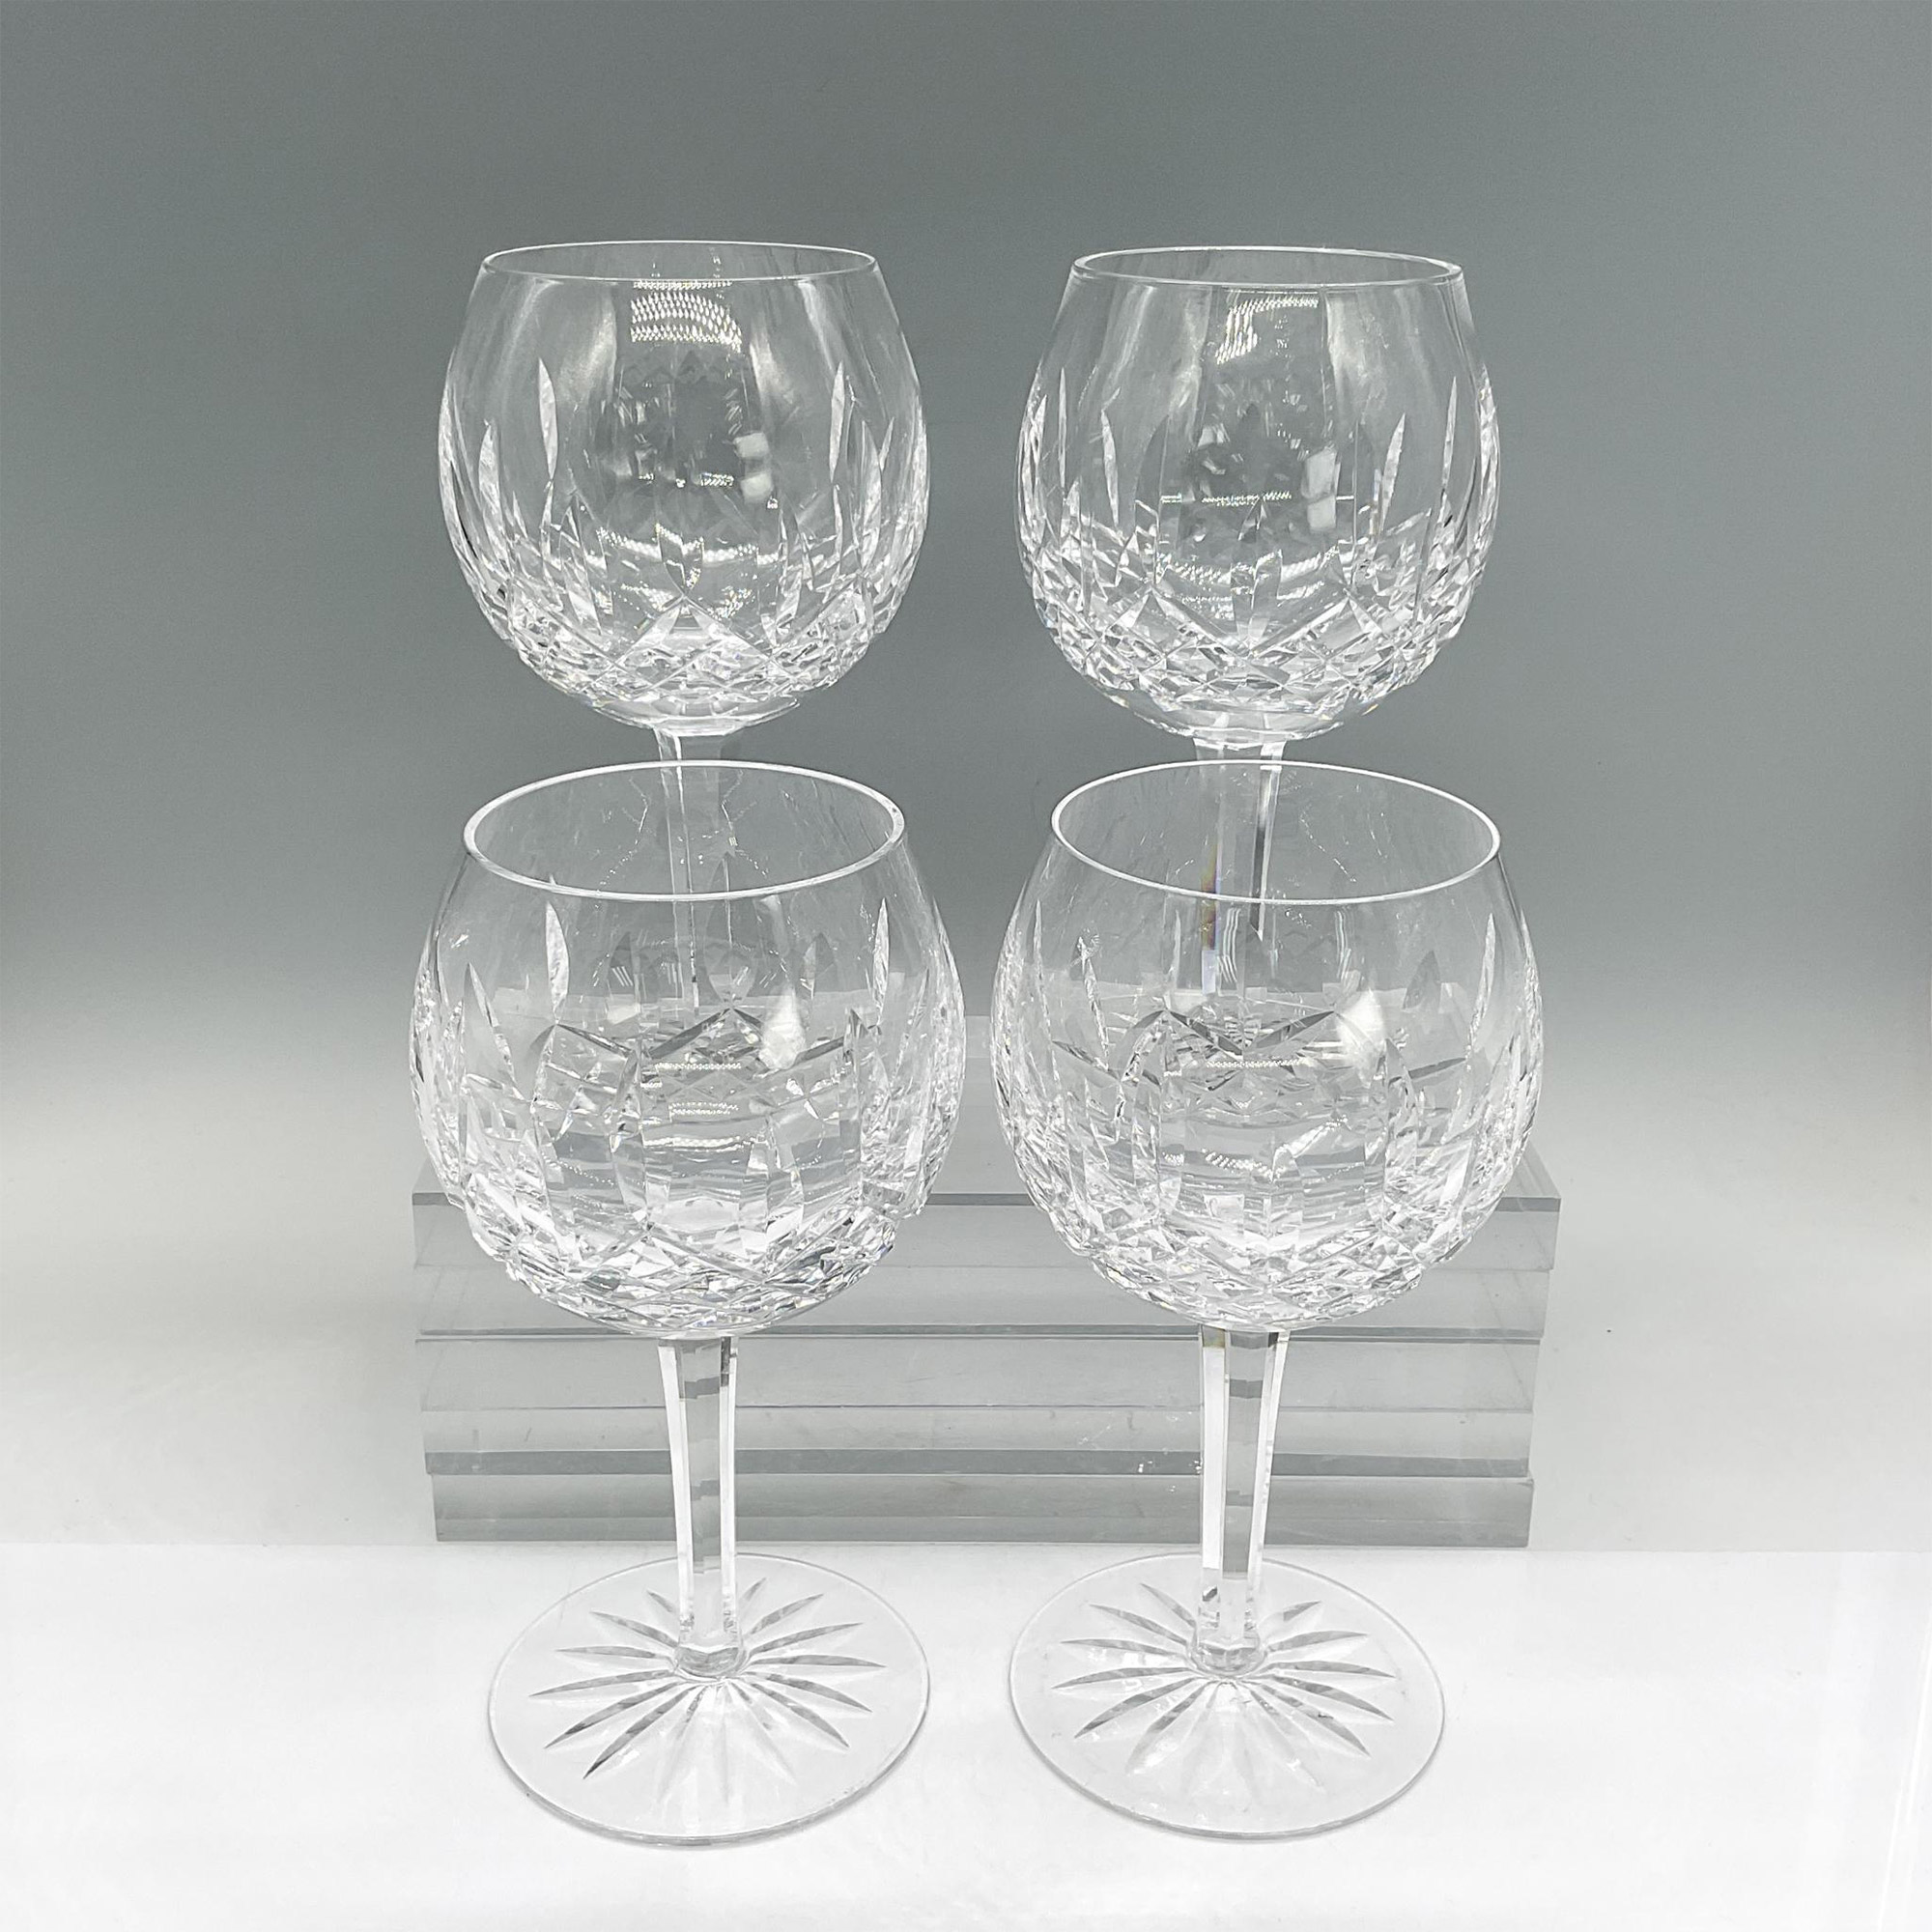 4pc Waterford Crystal Oversize Wine Glasses, Lismore - Image 2 of 4